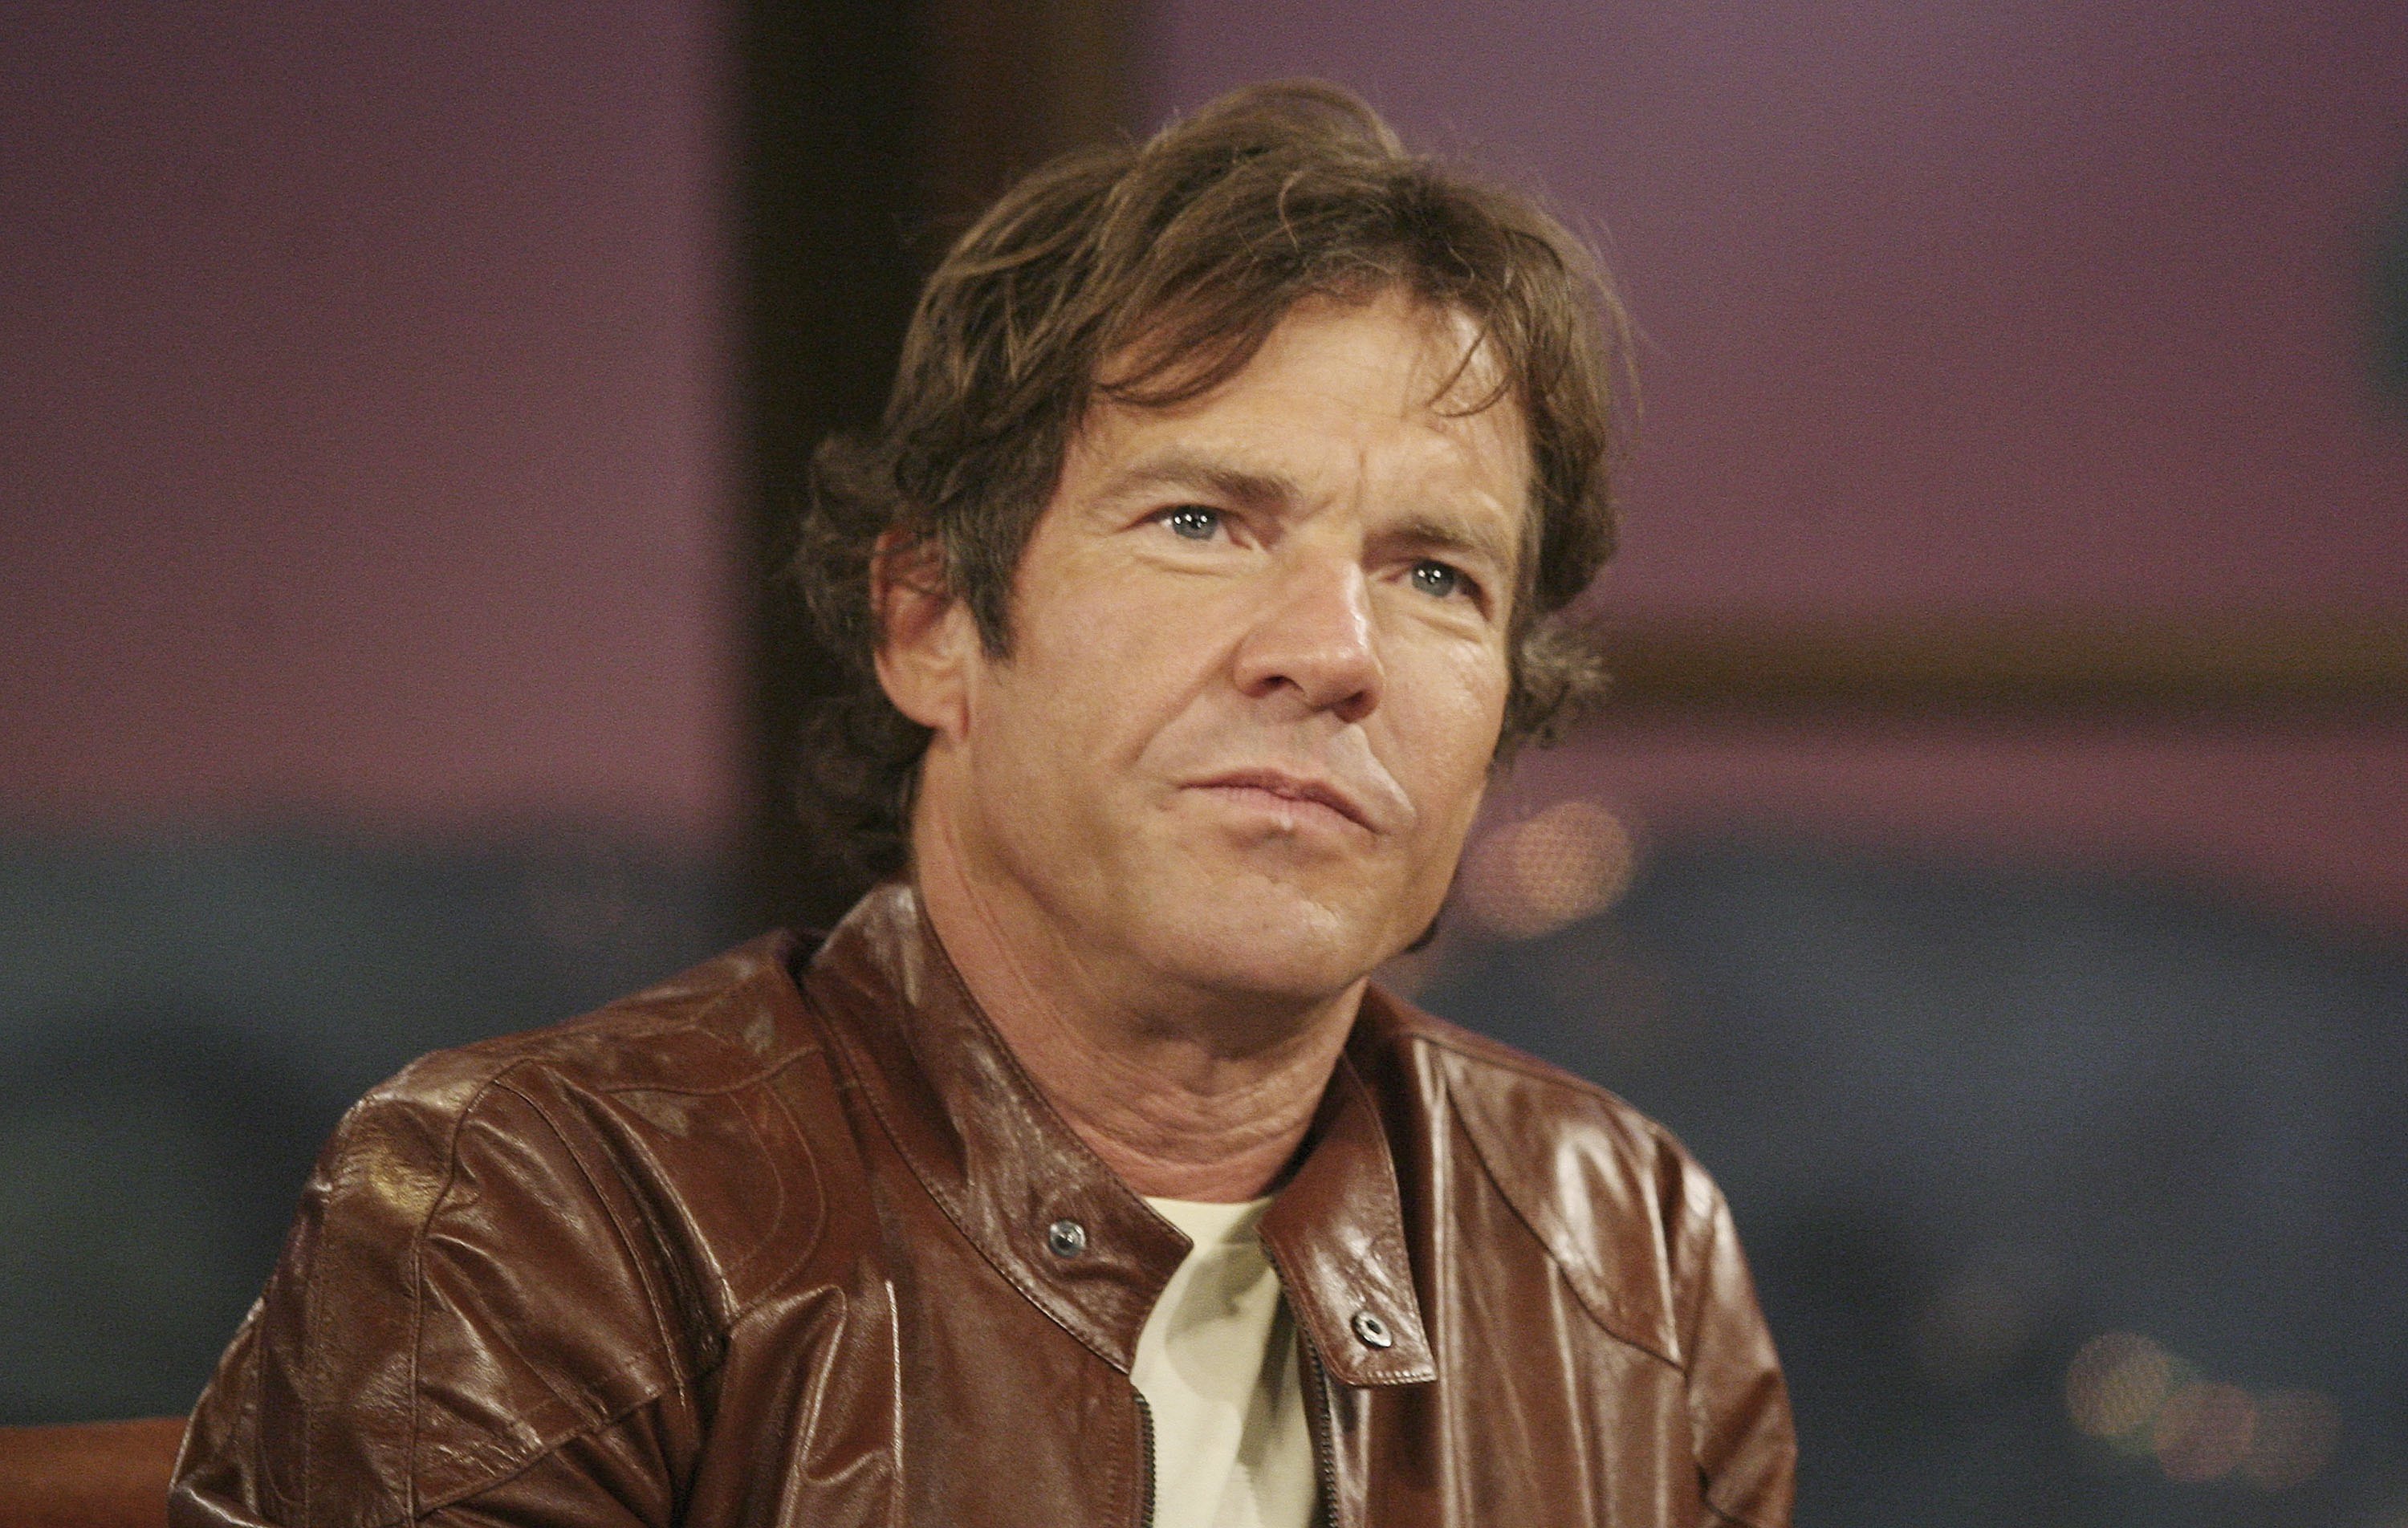 Dennis Quaid speaks during a "The Late Late Show With Craig Ferguson" on April 24, 2006 in Los Angeles, California | Source: Getty Images